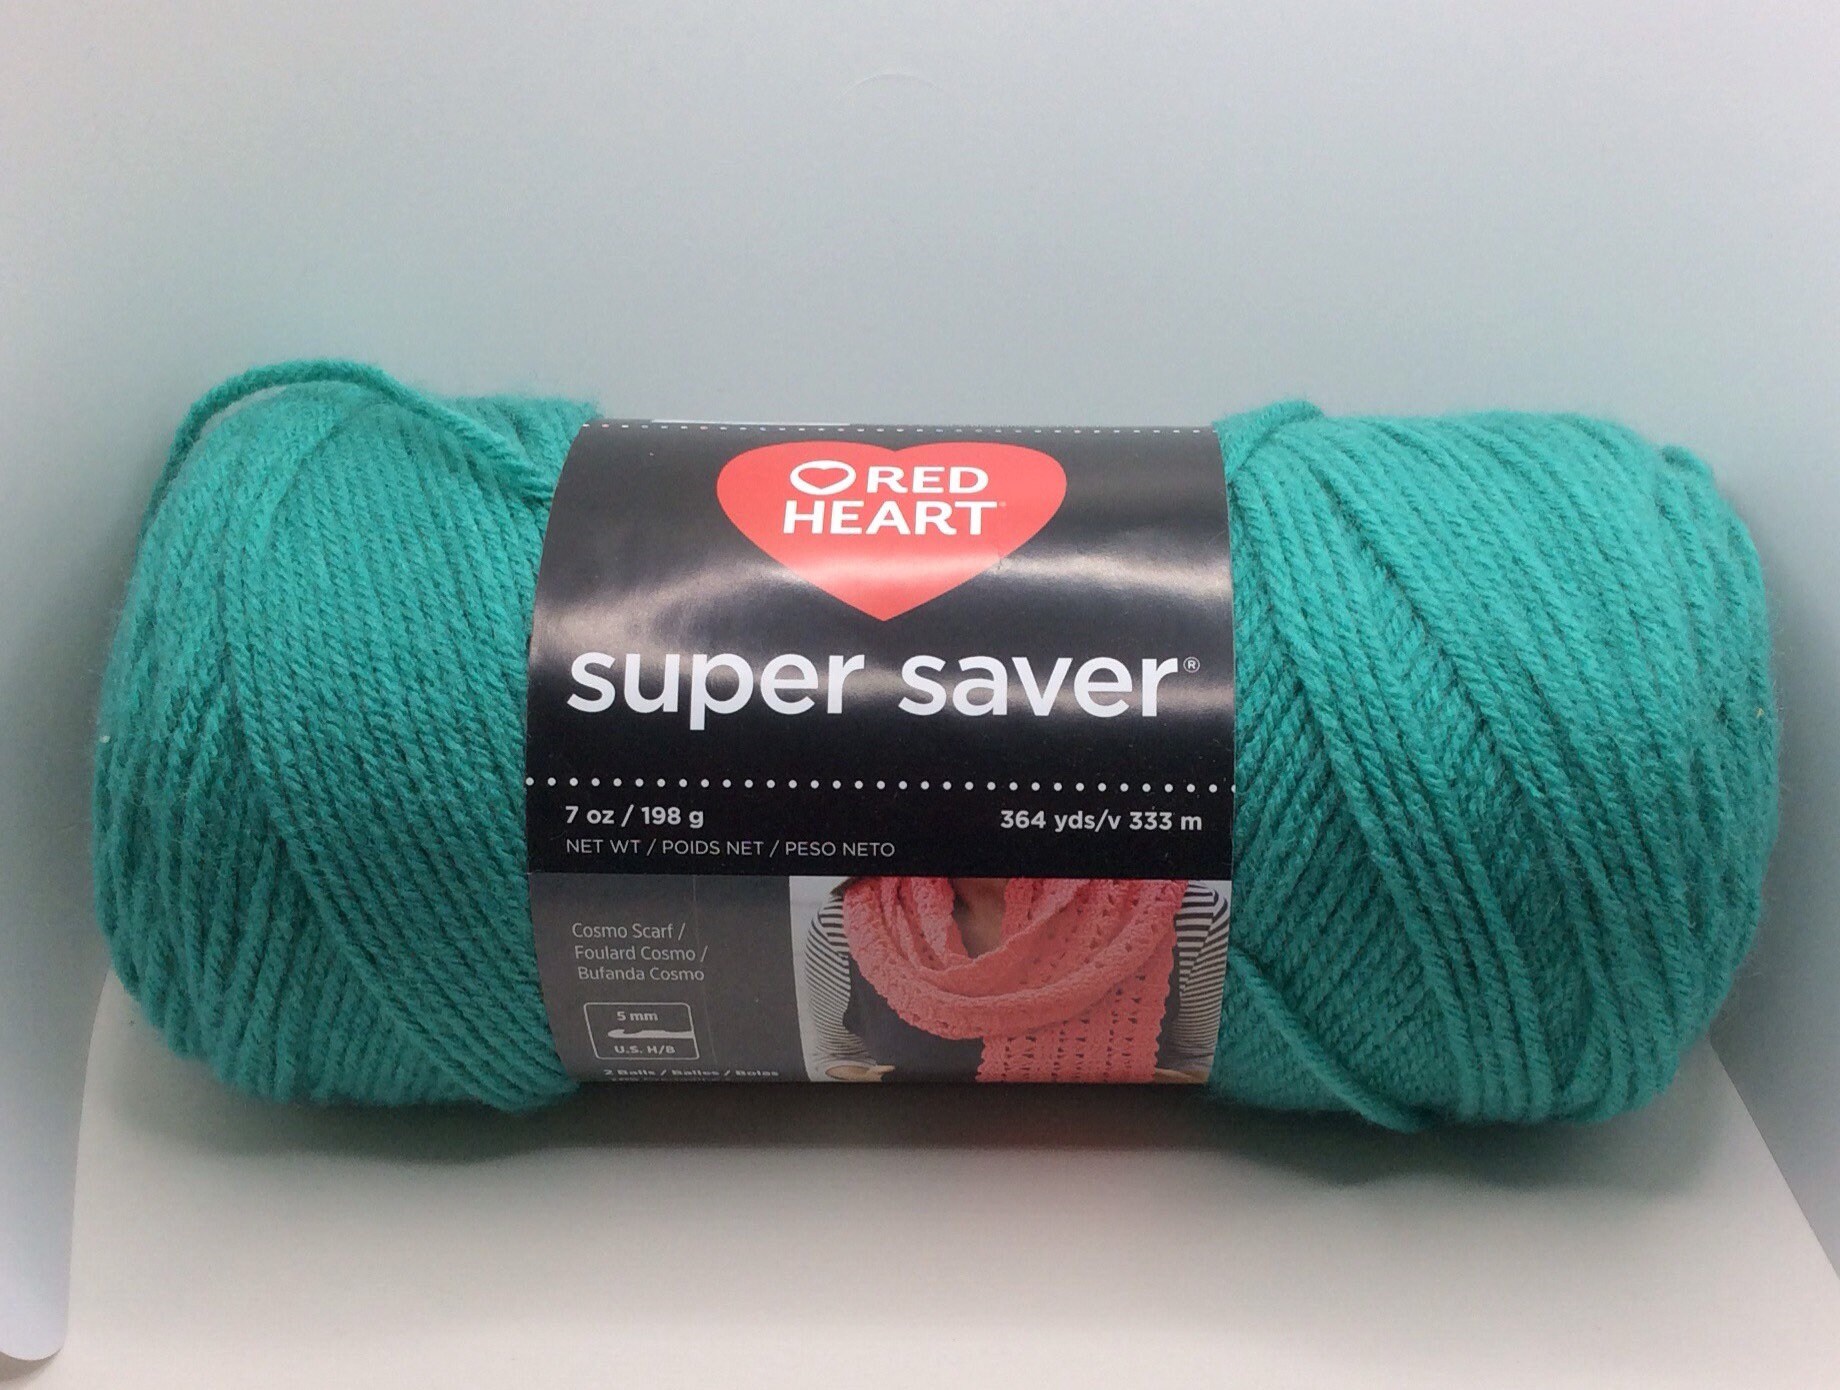 Red Heart Super Saver White Yarn Medium worsted weight 4-ply